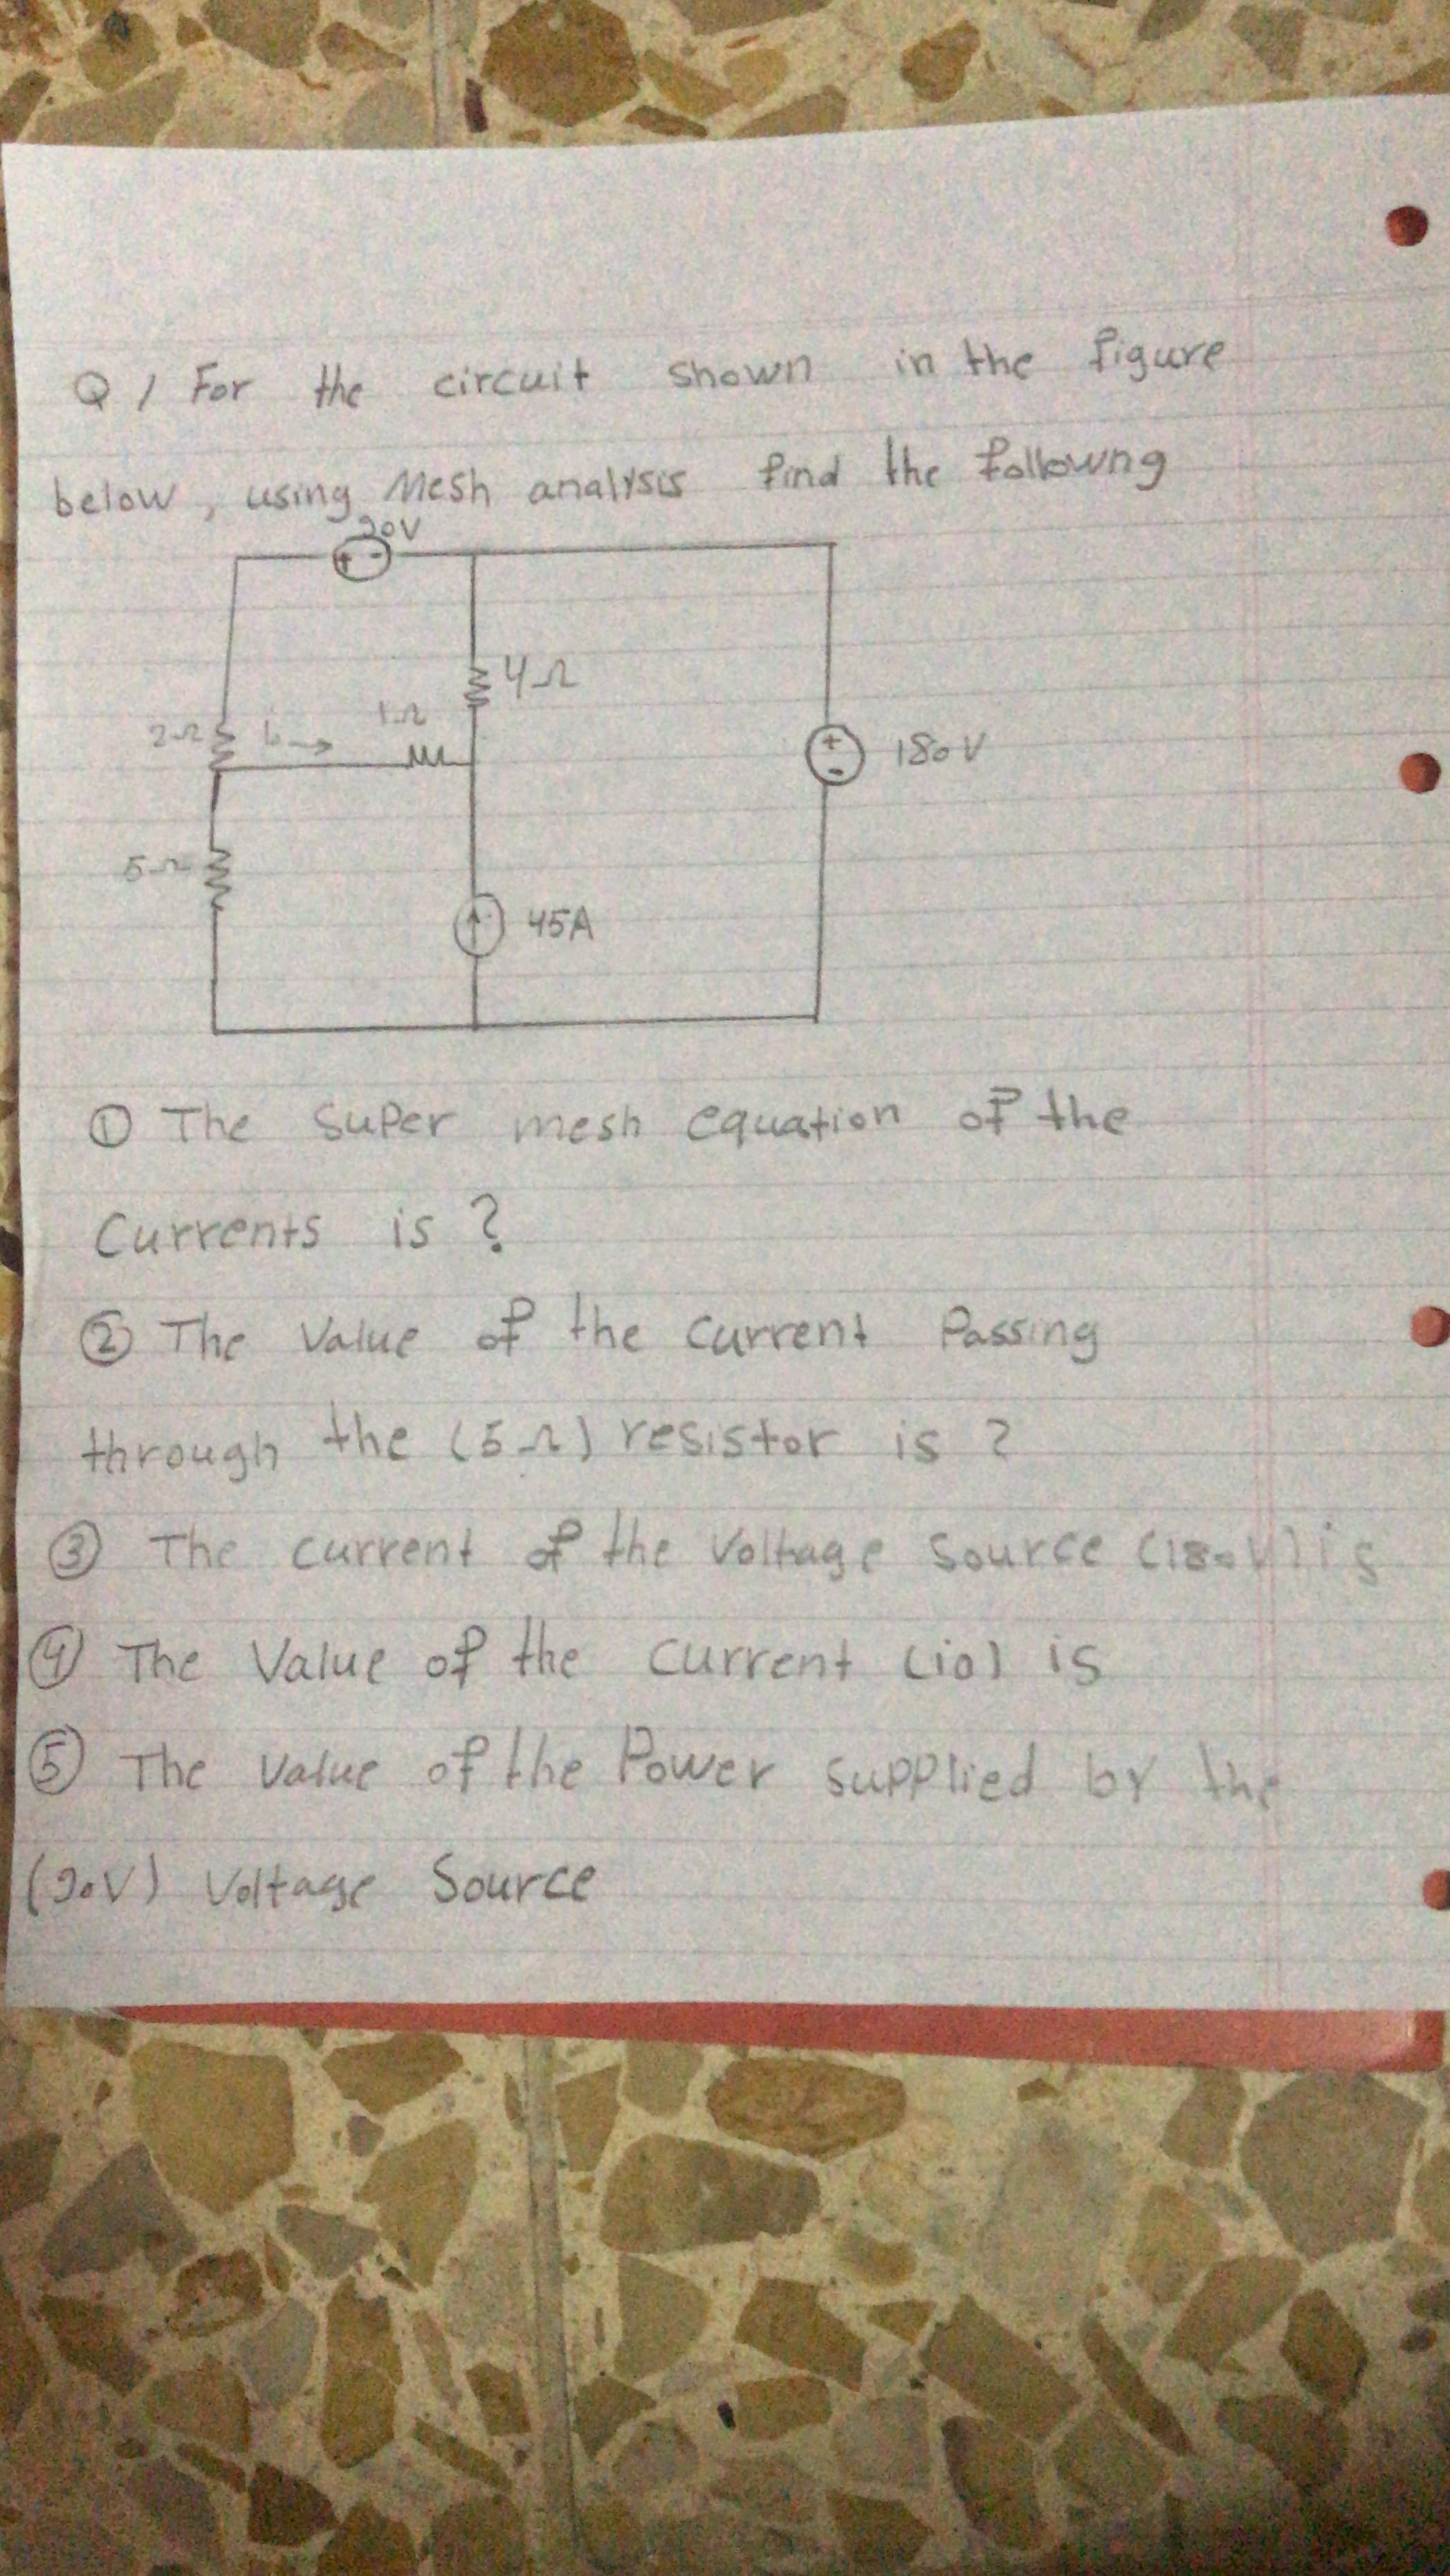 O The SuPer mesh Cquation of he
Currents is ?
The Value of the current Passing
Sussing
through
the (5) resistor is 2
© The current of the Voltag e Source C18-lis
The Value of the current Liol is
The Value of the Power supplied by th
